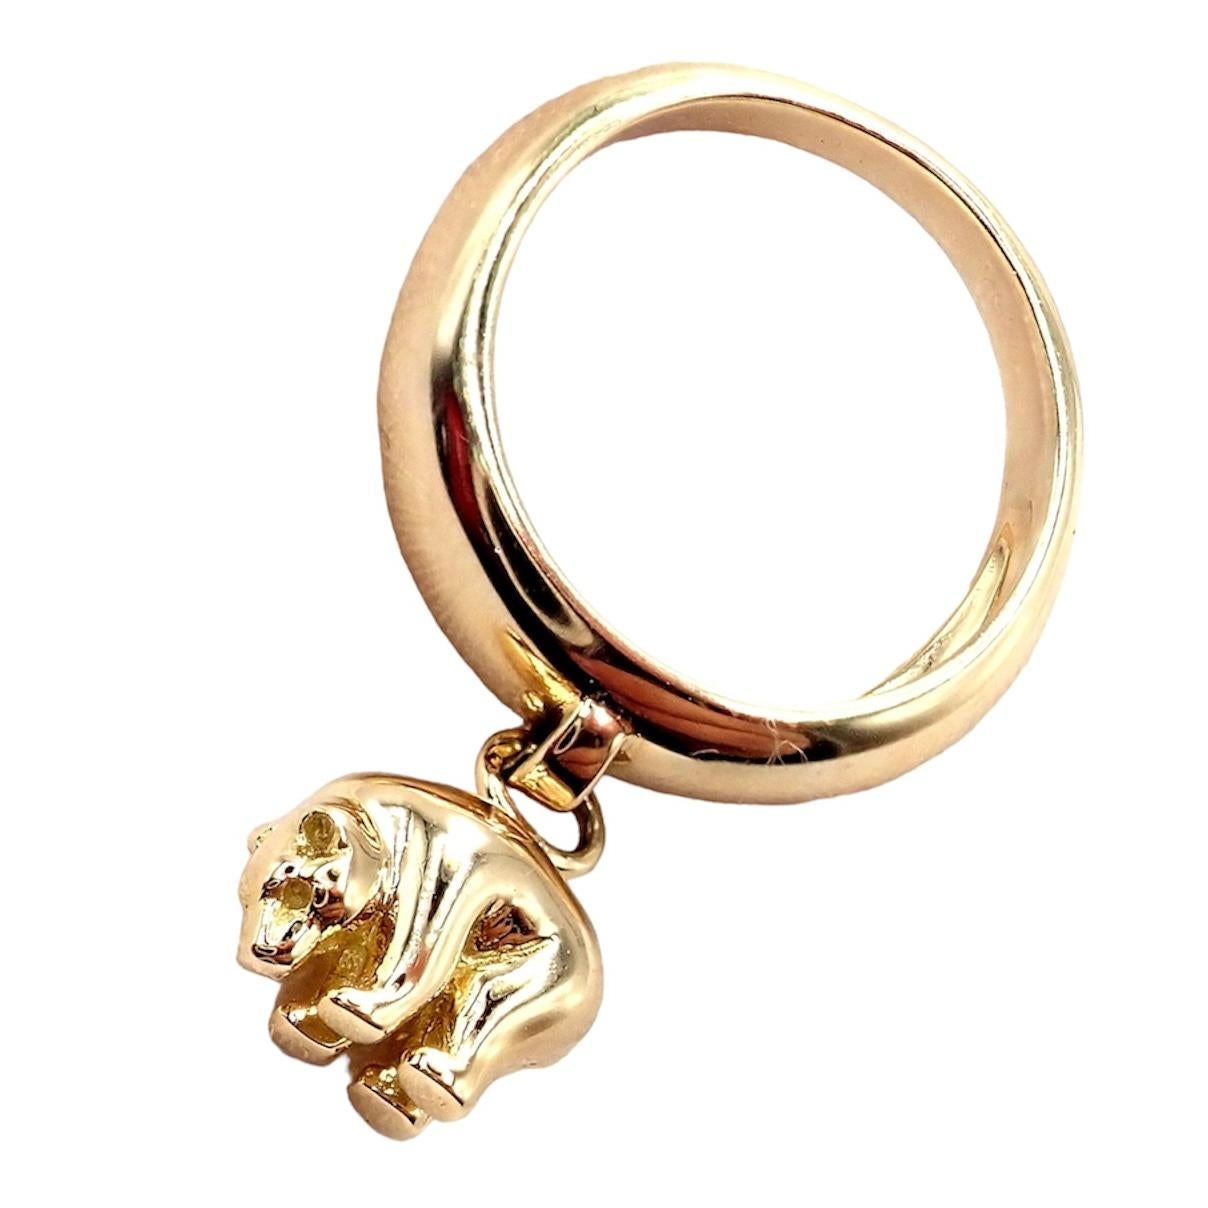 18k Yellow Gold Bear Charm Vintage Band Ring by Van Cleef & Arpels.
Details:
Ring Size: 6
Width: Band 6mm, Charm 8mm x 10mm
Weight: 8 grams
Stamped Hallmarks: Van Cleef & Arpels 750 OU005xxxx
*Free Shipping within the United States*
YOUR PRICE: